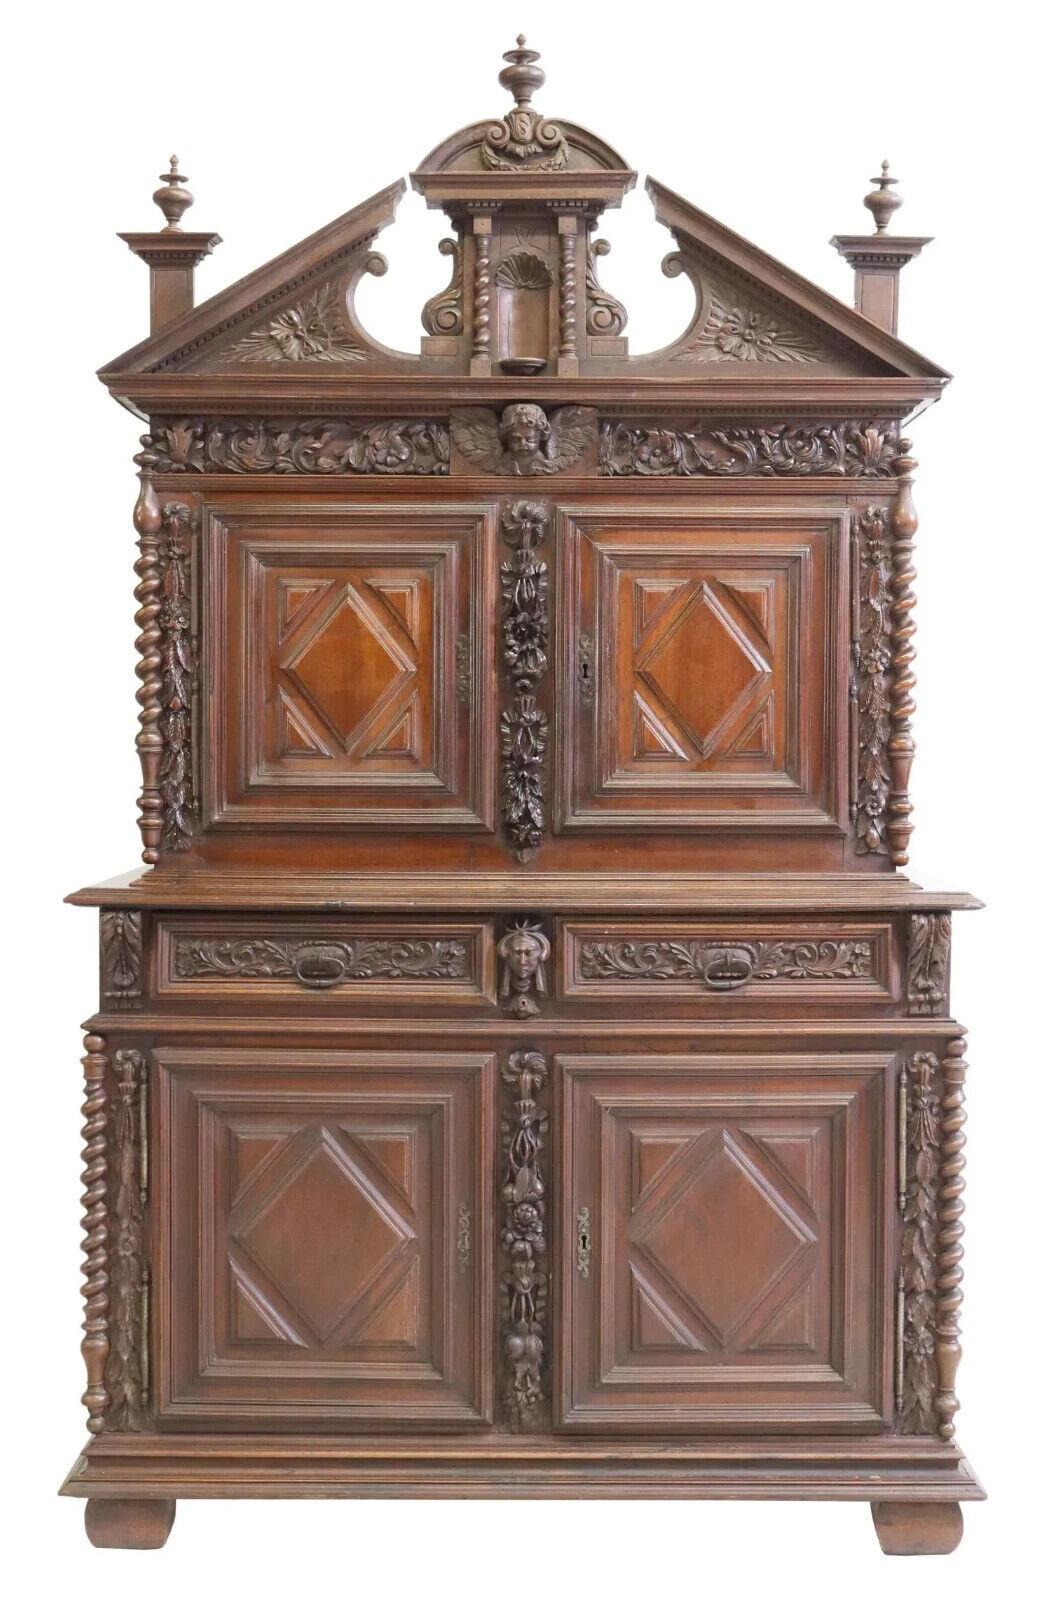 Gorgeous Antique Sideboard, French Louis XIII Style Geometric, Carved, 18th C., 1700s!!

French Louis XIII style sideboard, 18th / 19th century, having pediment crest, the whole carved with foliates and protruding masks, geometric paneled cabinet